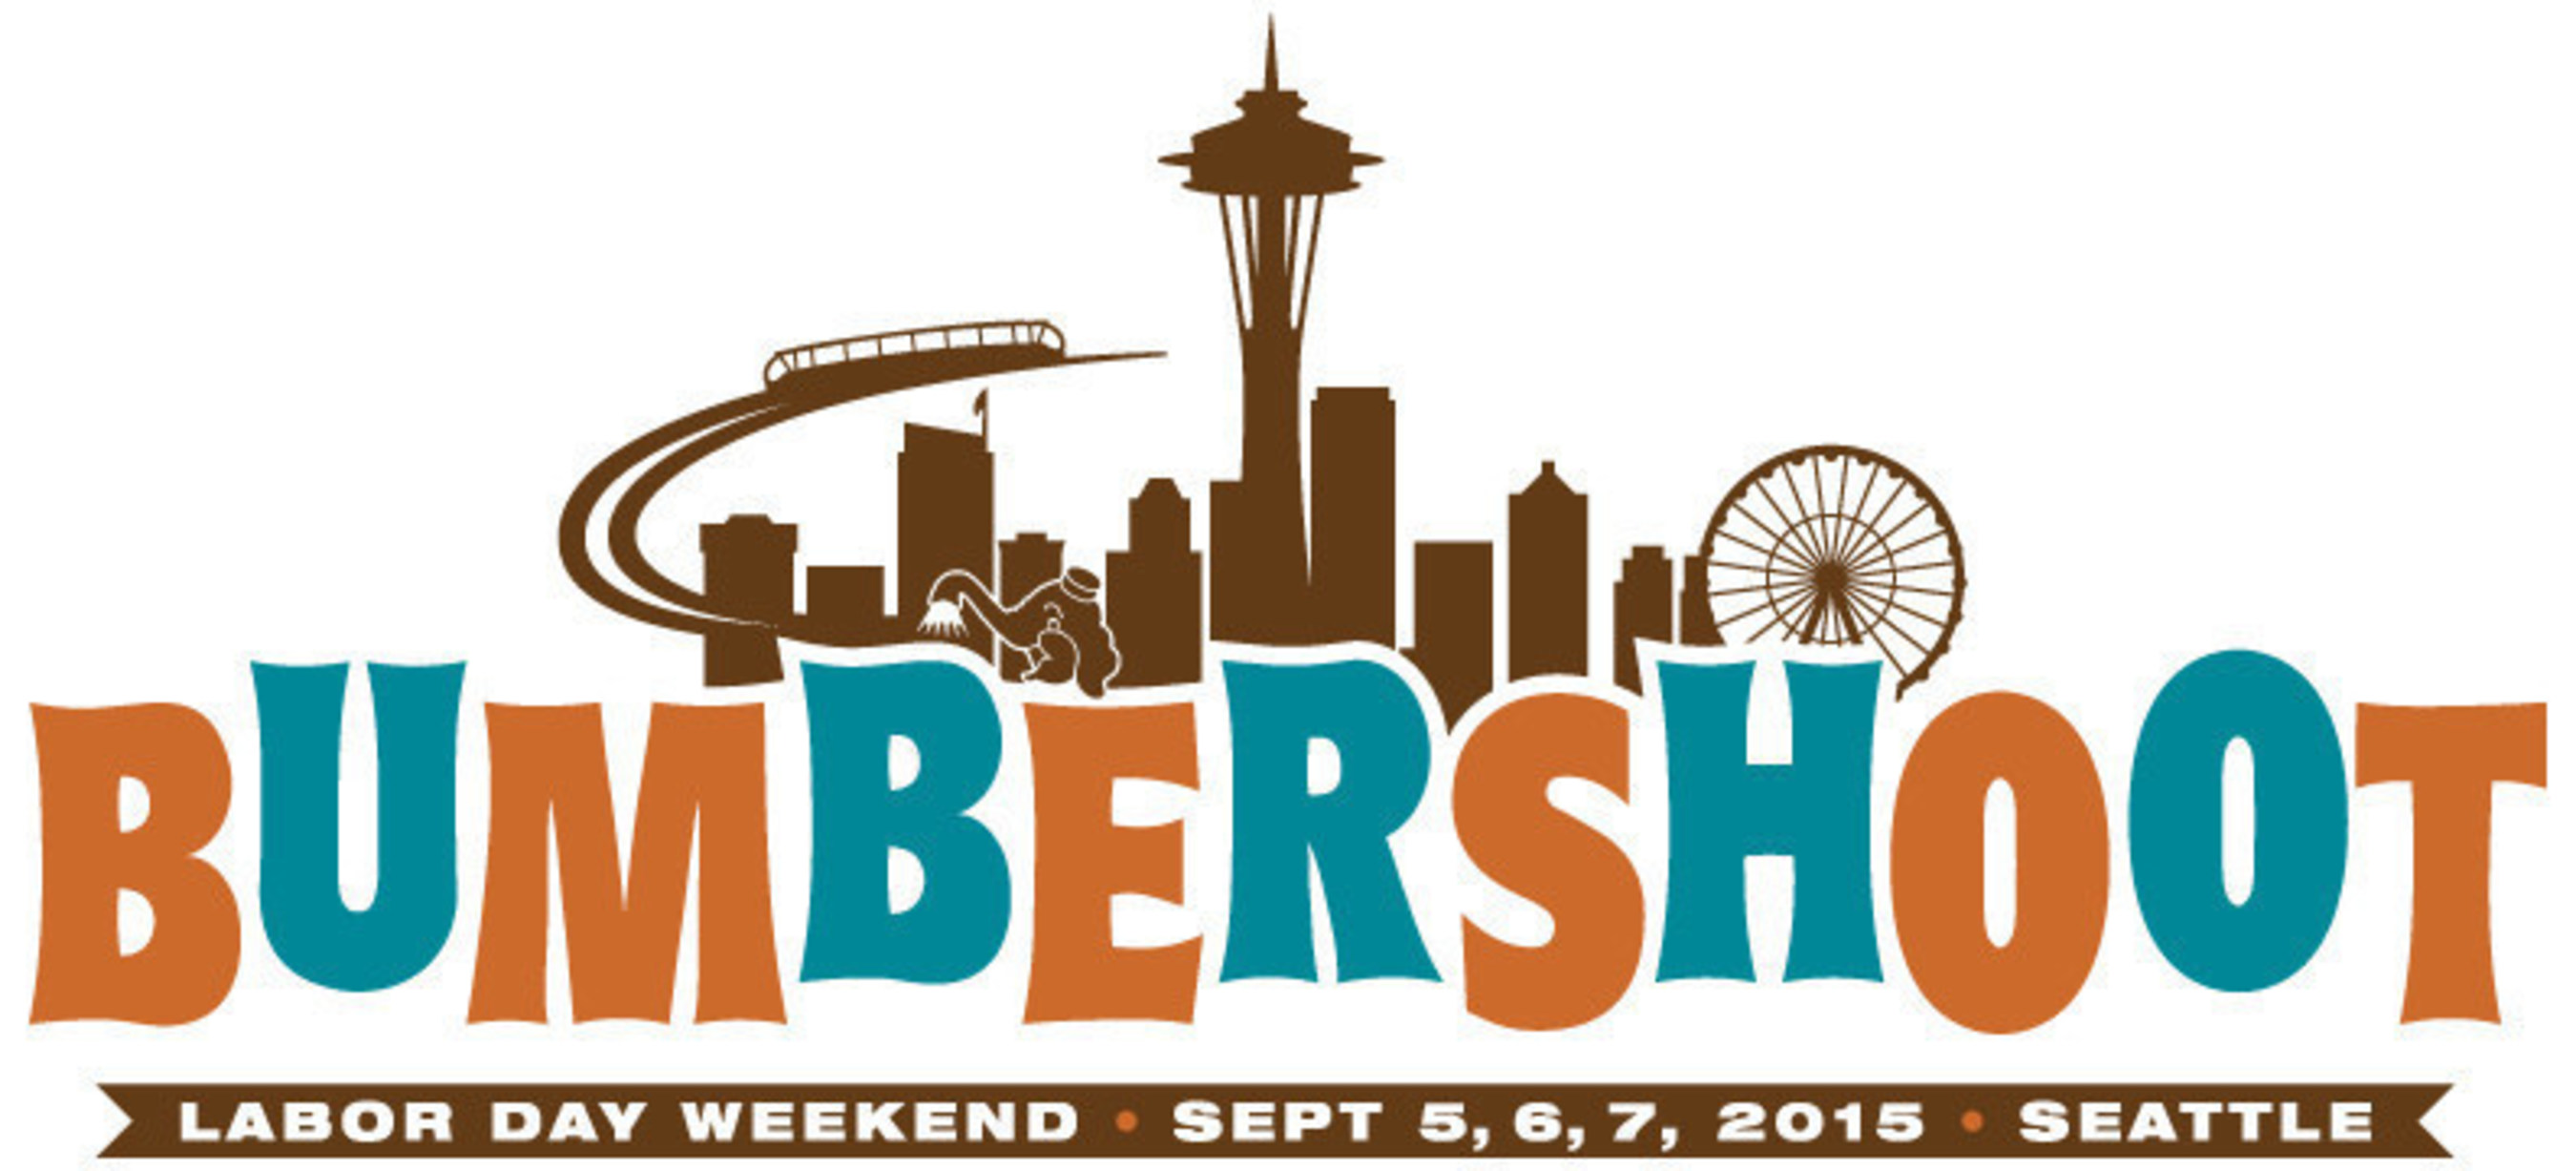 45th Edition Of Seattle's Bumbershoot Festival To Take Place September 5, 6, & 7